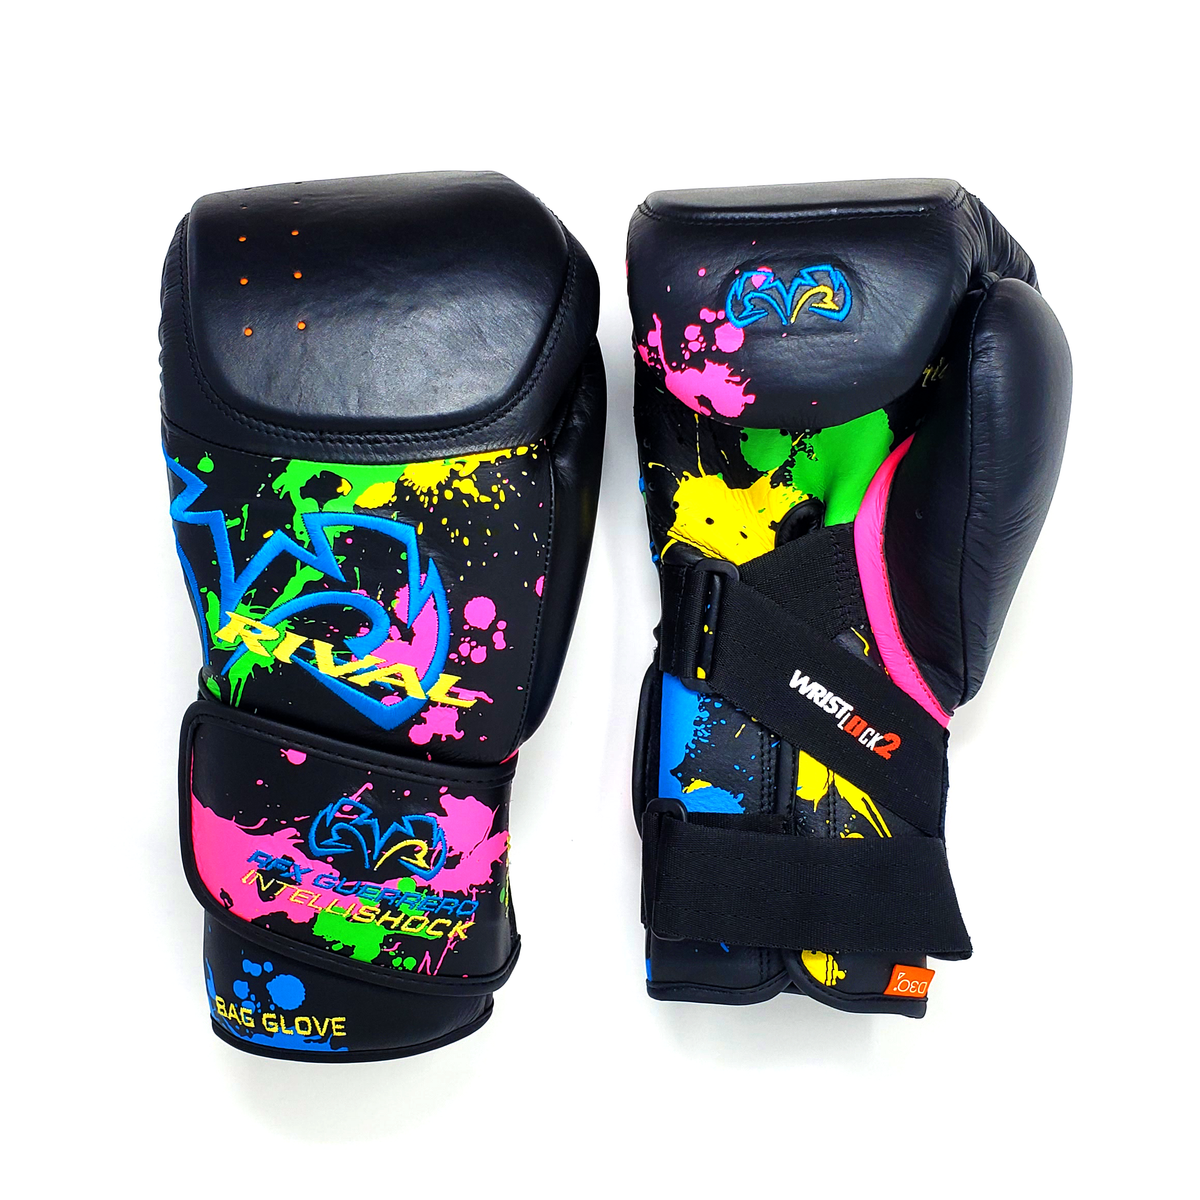 Versace just made boxing ~extra~ with these $3,717 gloves